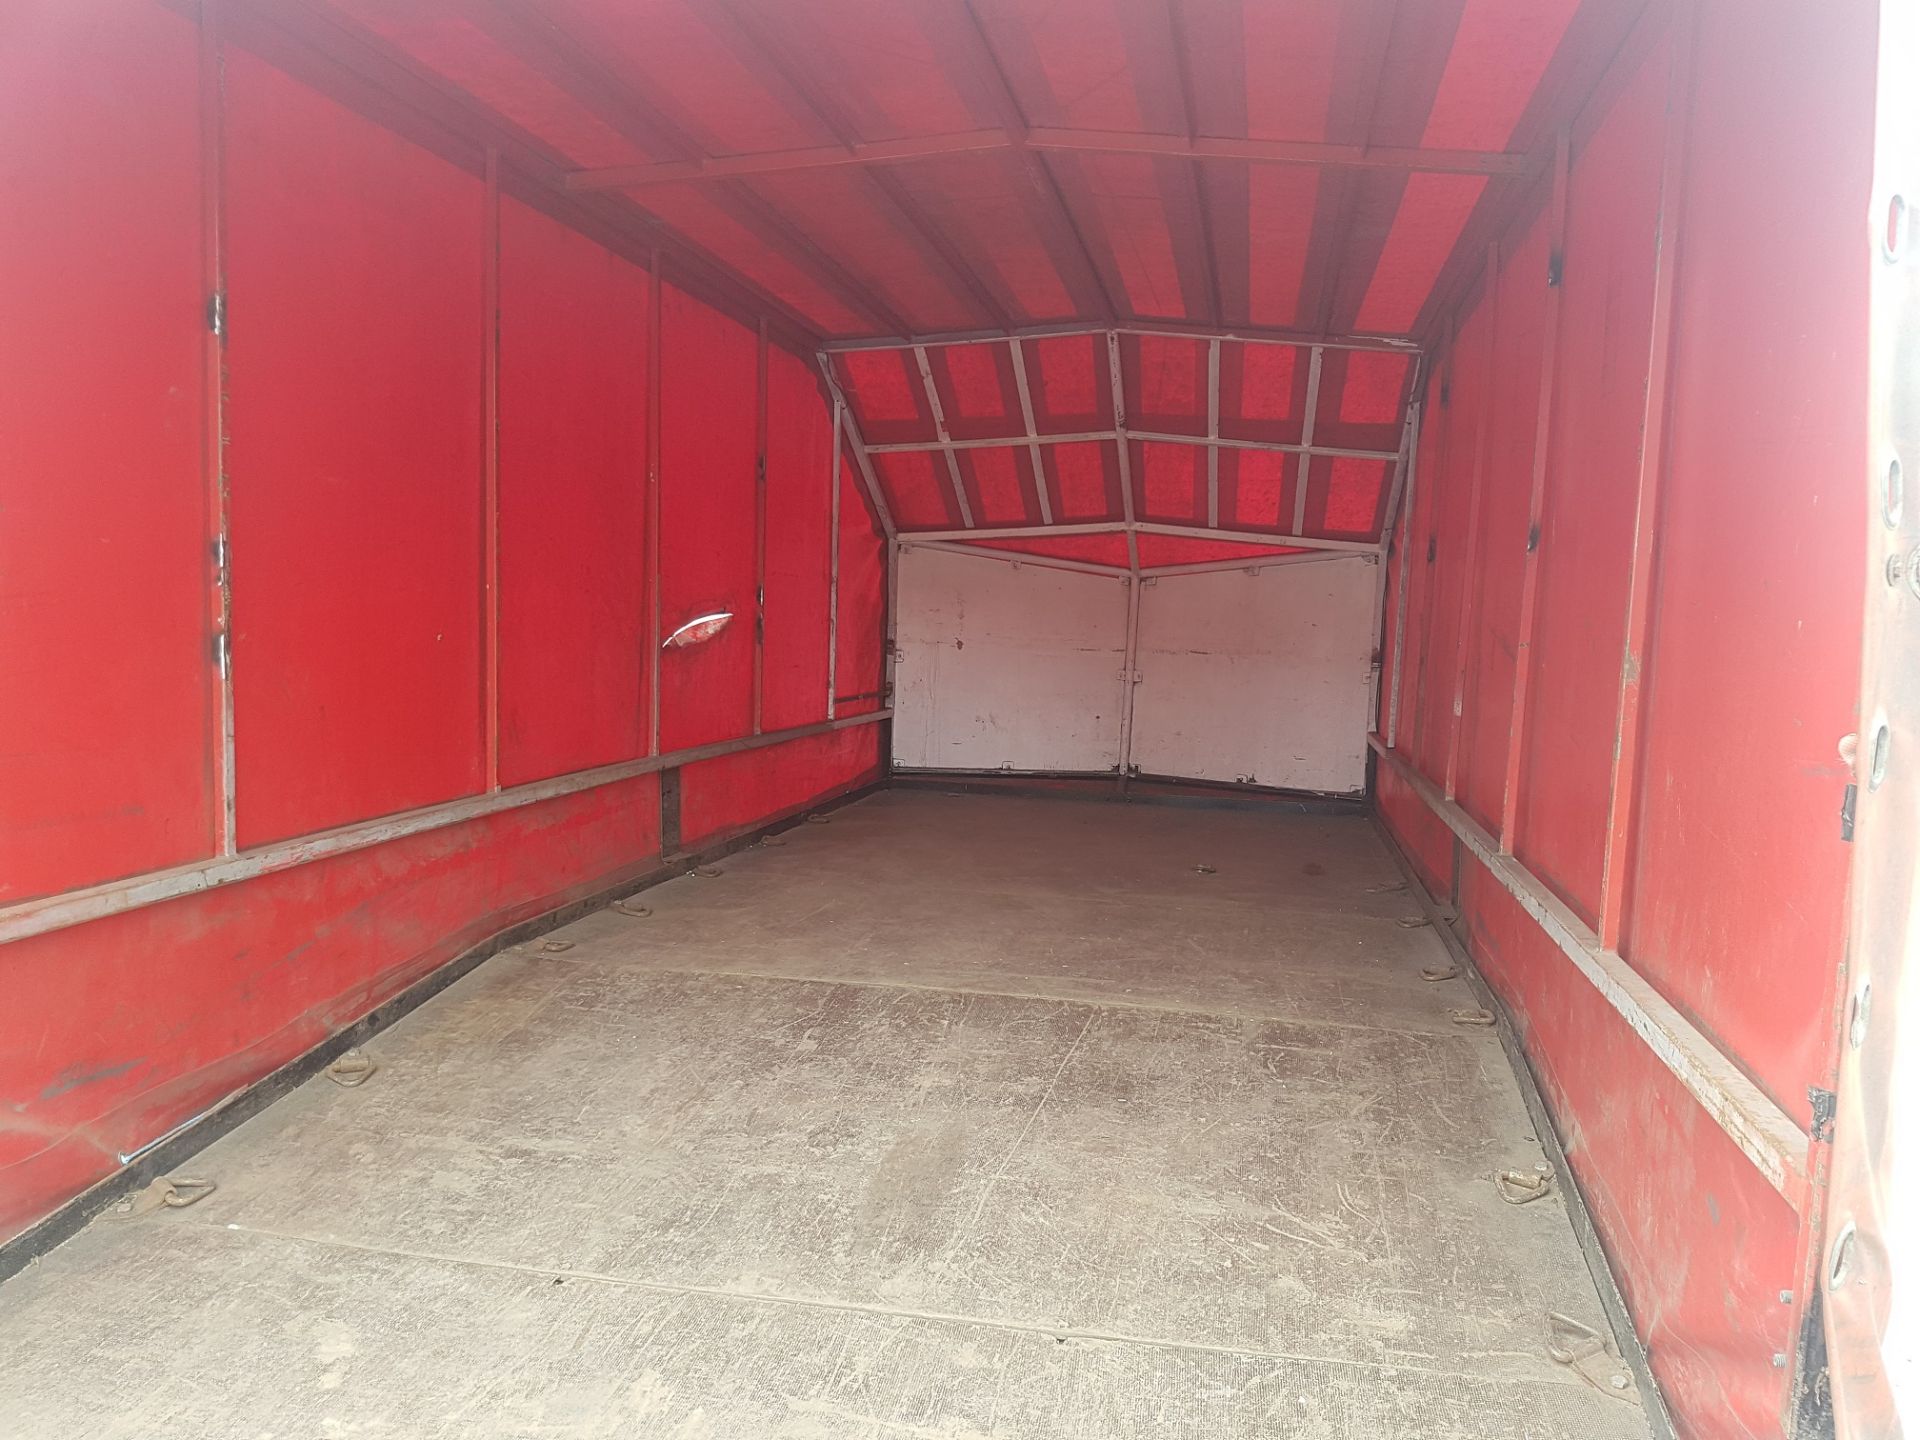 TRI-AXLE BEAVER-TAIL CAR TRANSPORTER COVERED TRAILER - 5.5 METRE BED LENGTH! *PLUS VAT* - Image 10 of 13